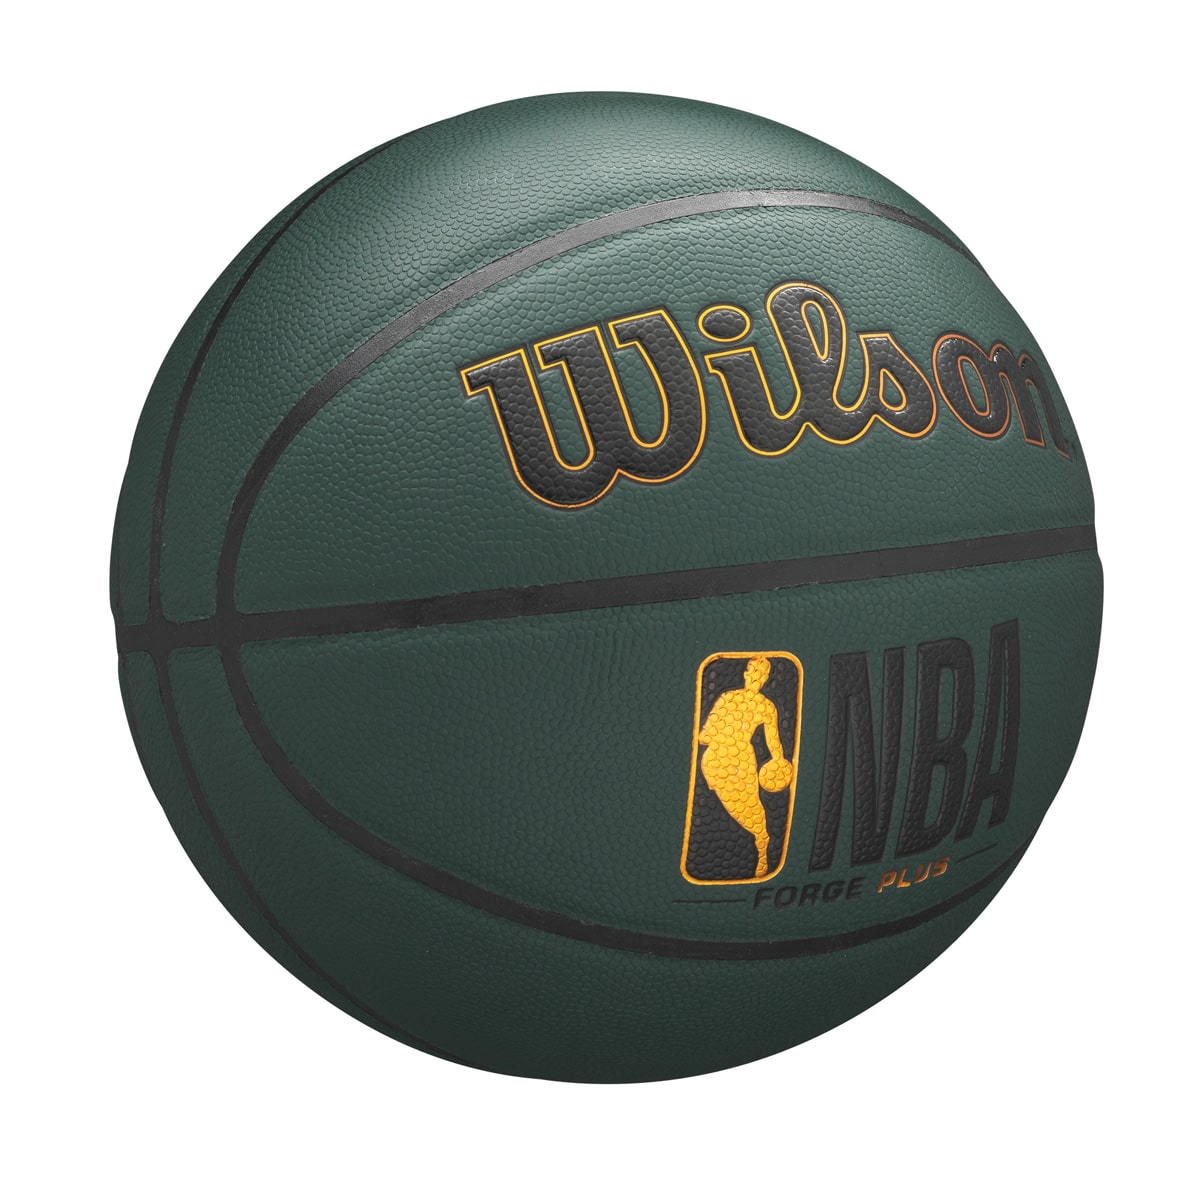 WTB8103EC_1_7_07_NBA_Forge_Plus_Official_ForestGreen.png.high-res-min